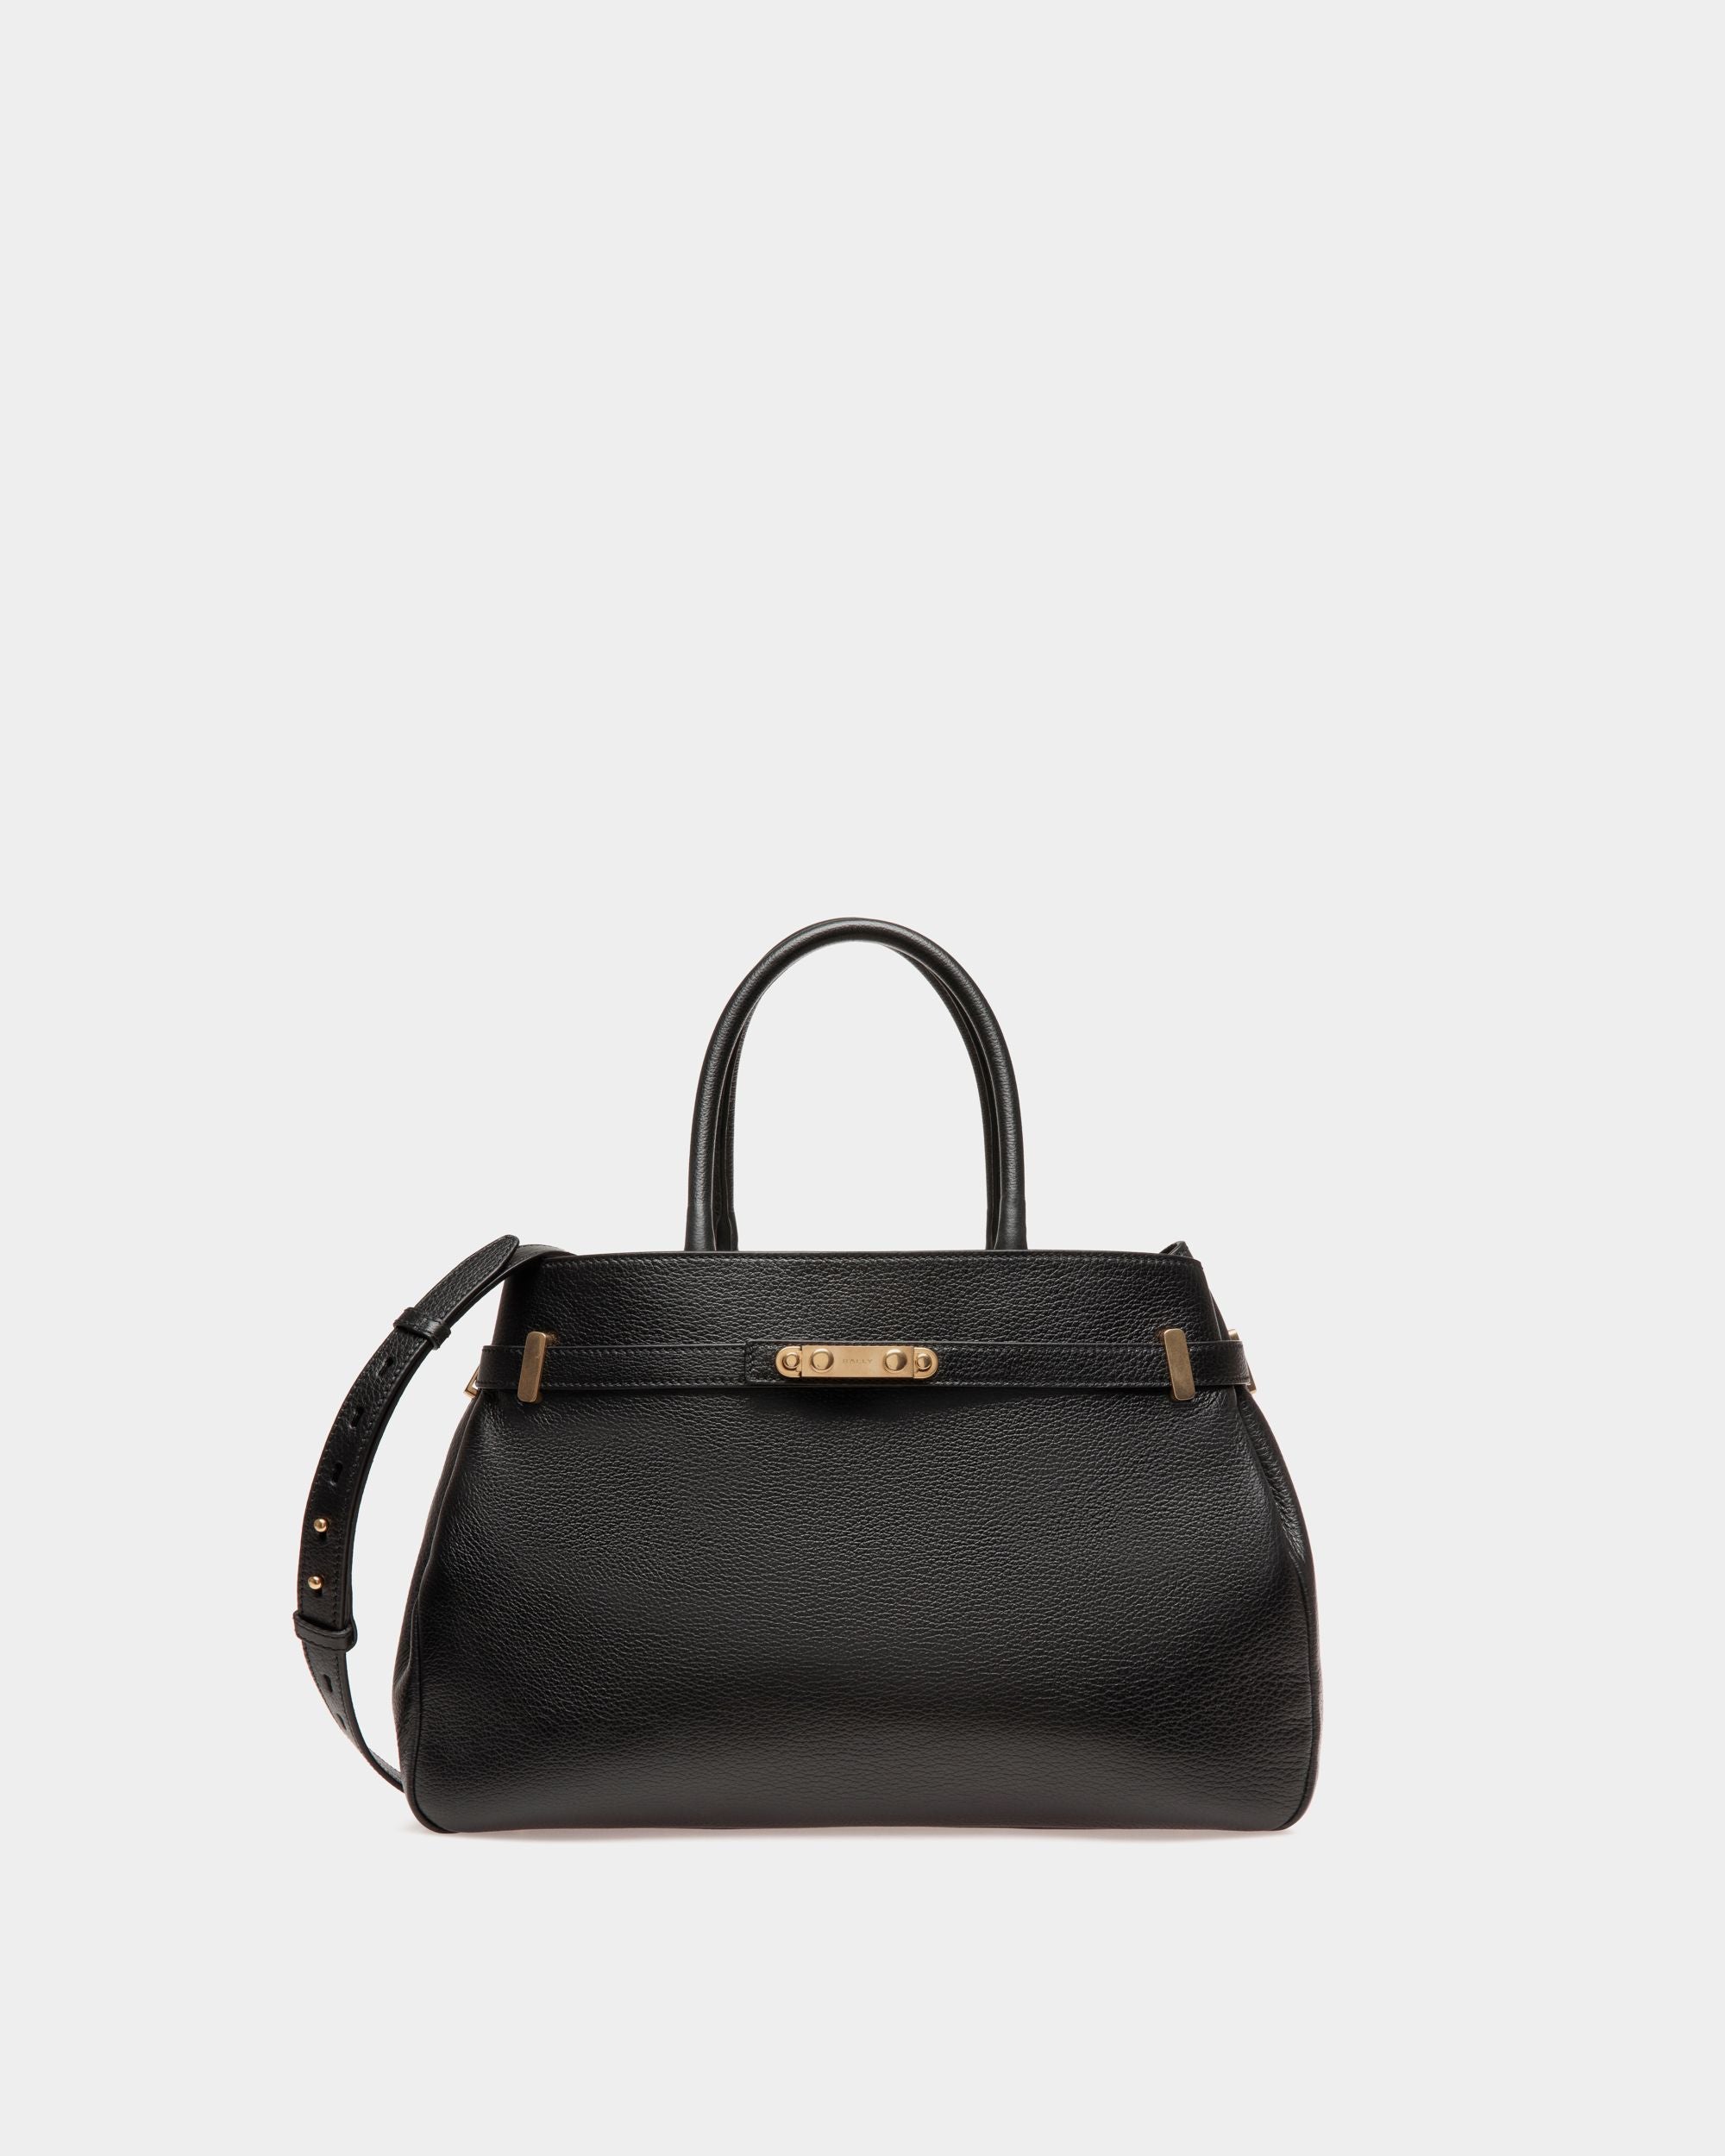 Women's Carriage Tote Bag in Black Leather | Bally | Still Life Front